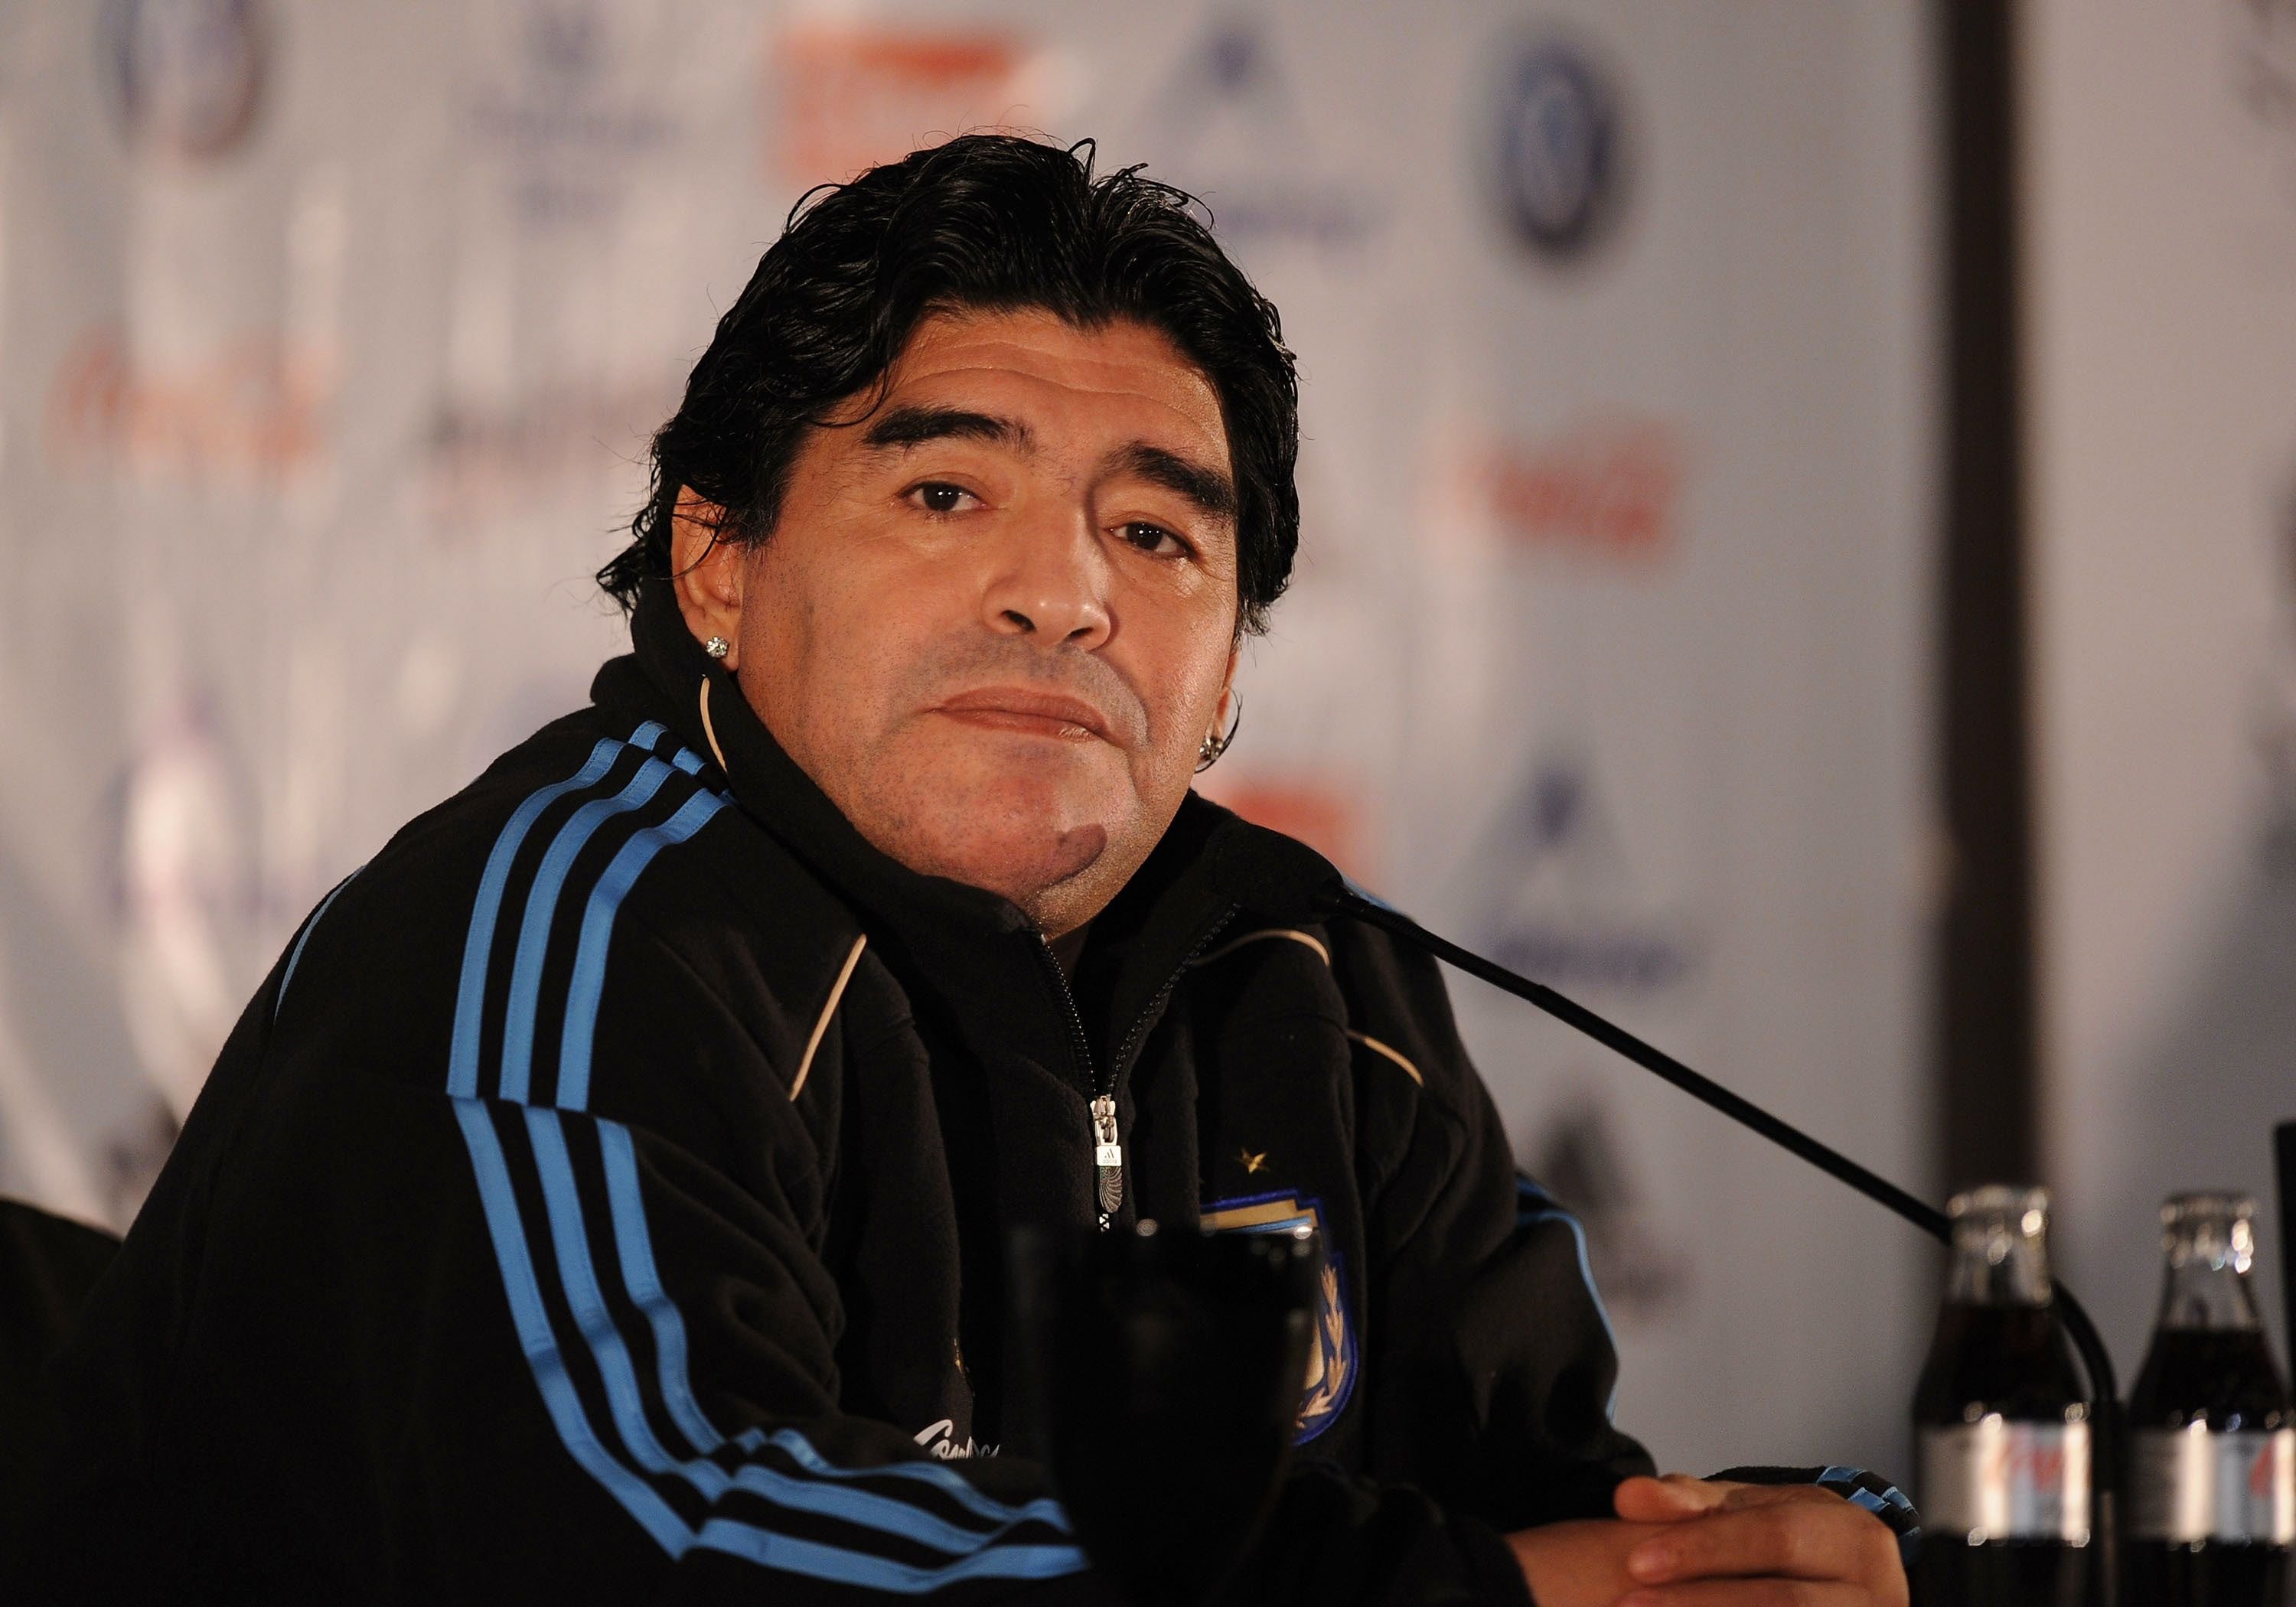 Diego Maradona attends a press conference at a hotel on November 12, 2009 in Madrid, Spain. | Photo: Getty Images